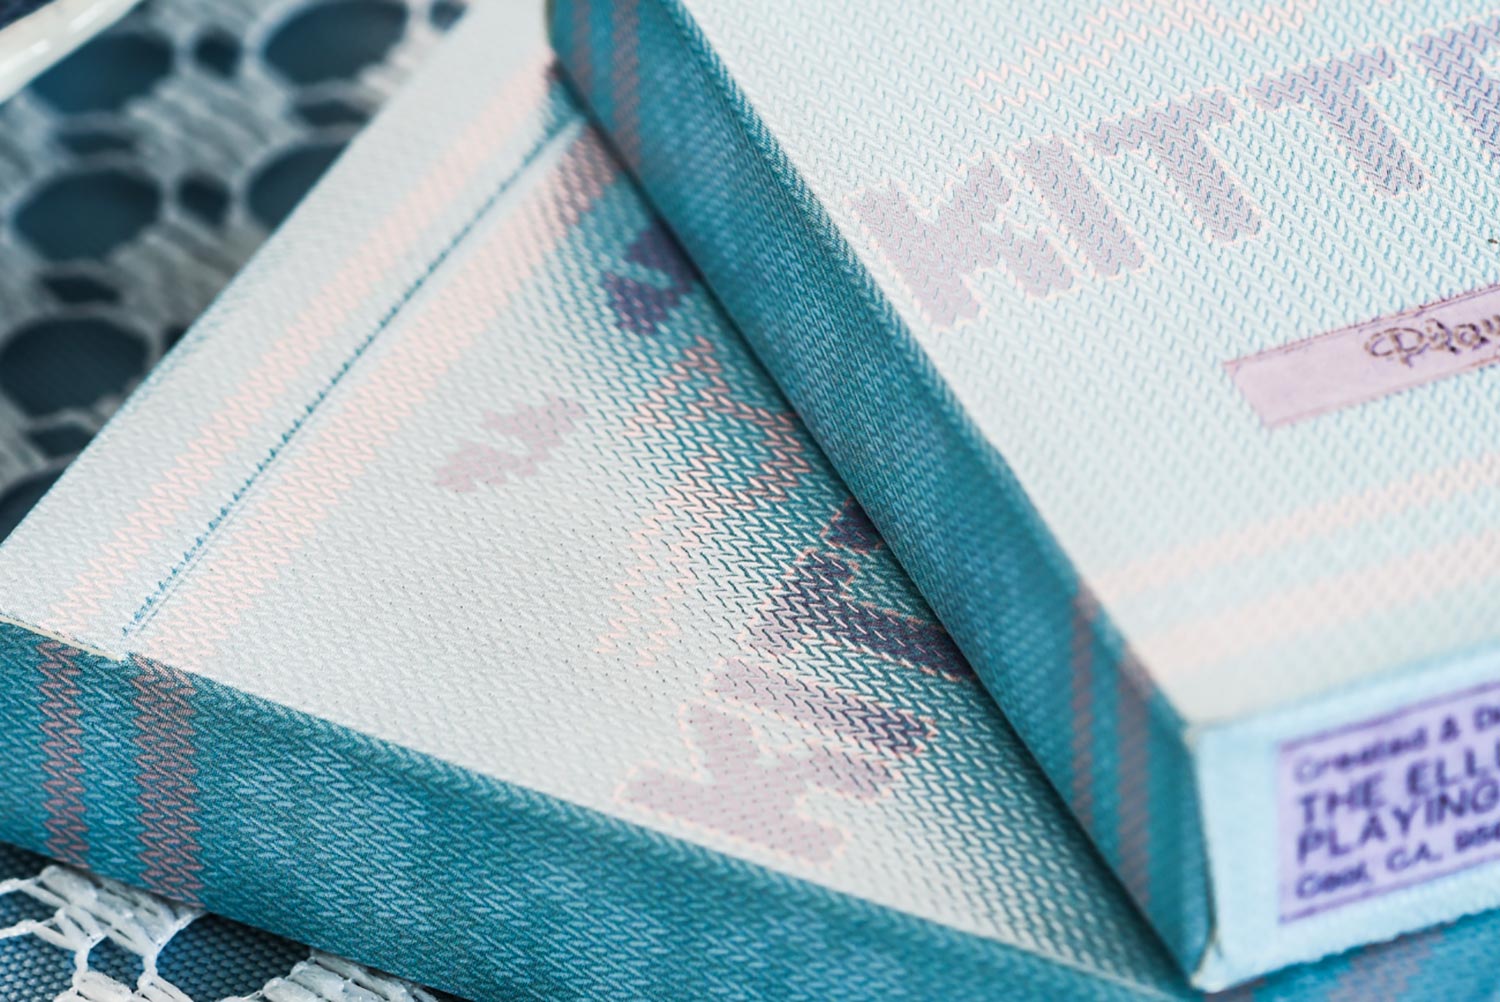 Blue Kittens by Luxury-pressed E7 | Ellusionist